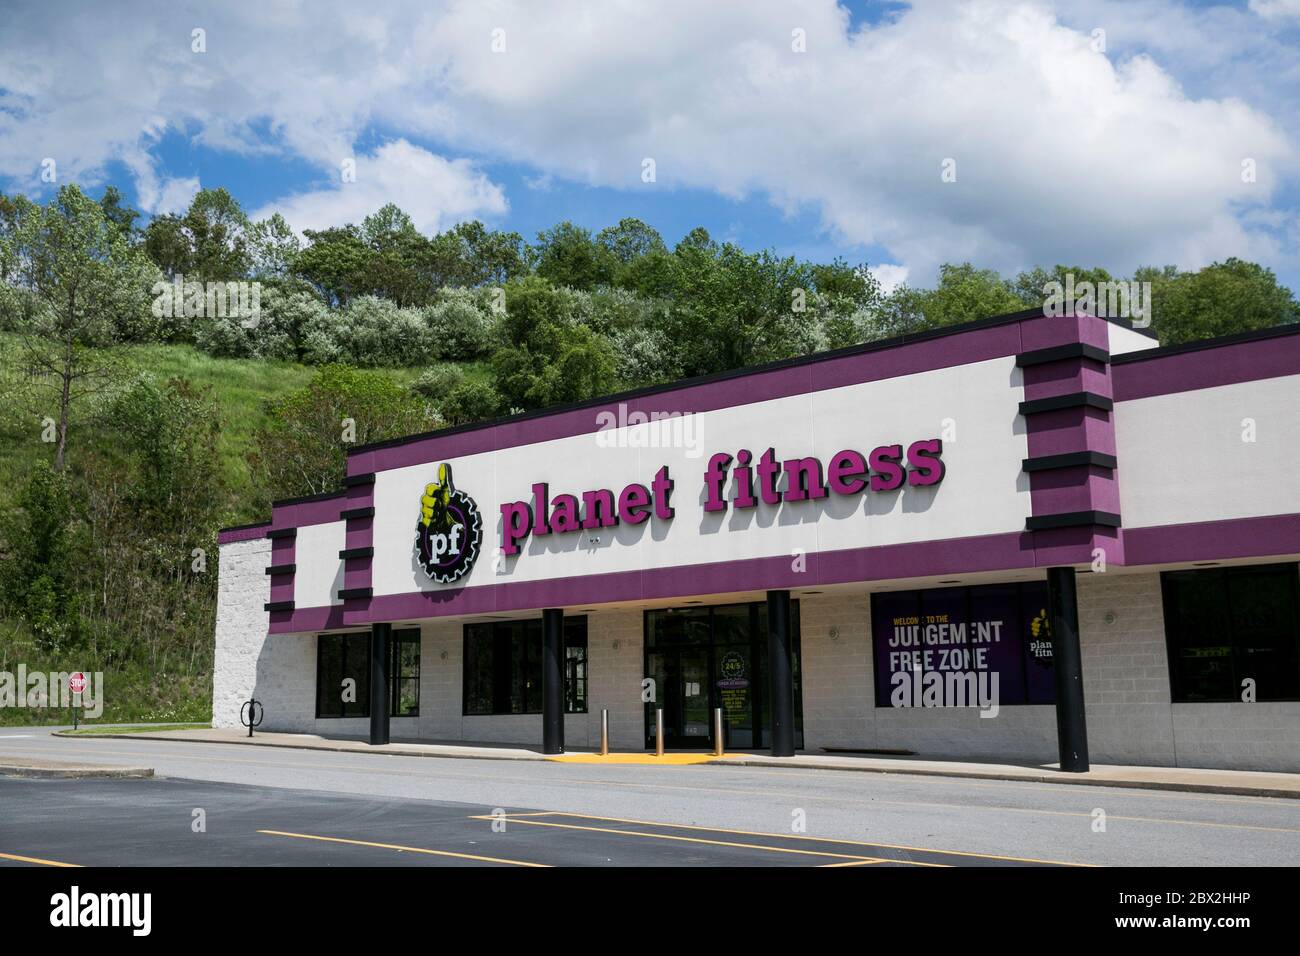 A logo sign outside of a Planet Fitness location in Bridgeport, West Virginia on May 29, 2020. Stock Photo